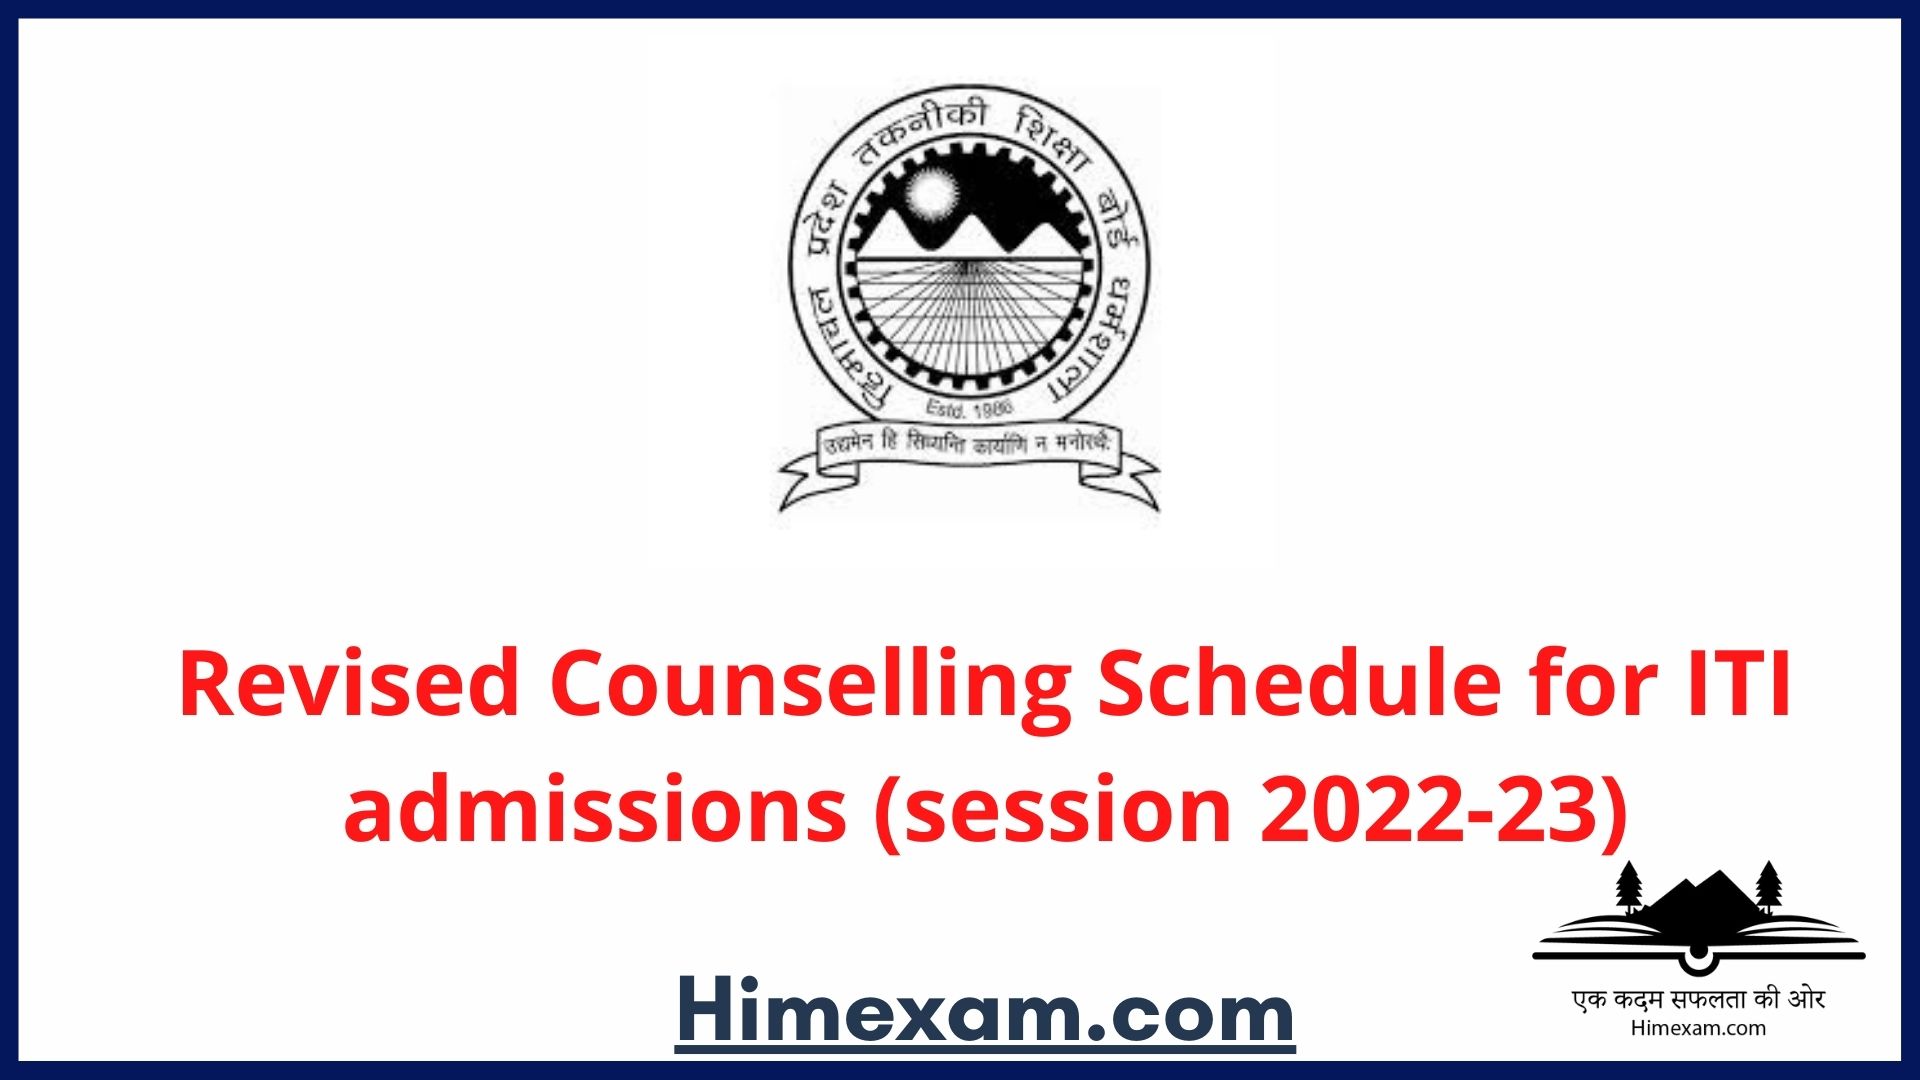 Revised Counselling Schedule for ITI admissions (session 2022-23)